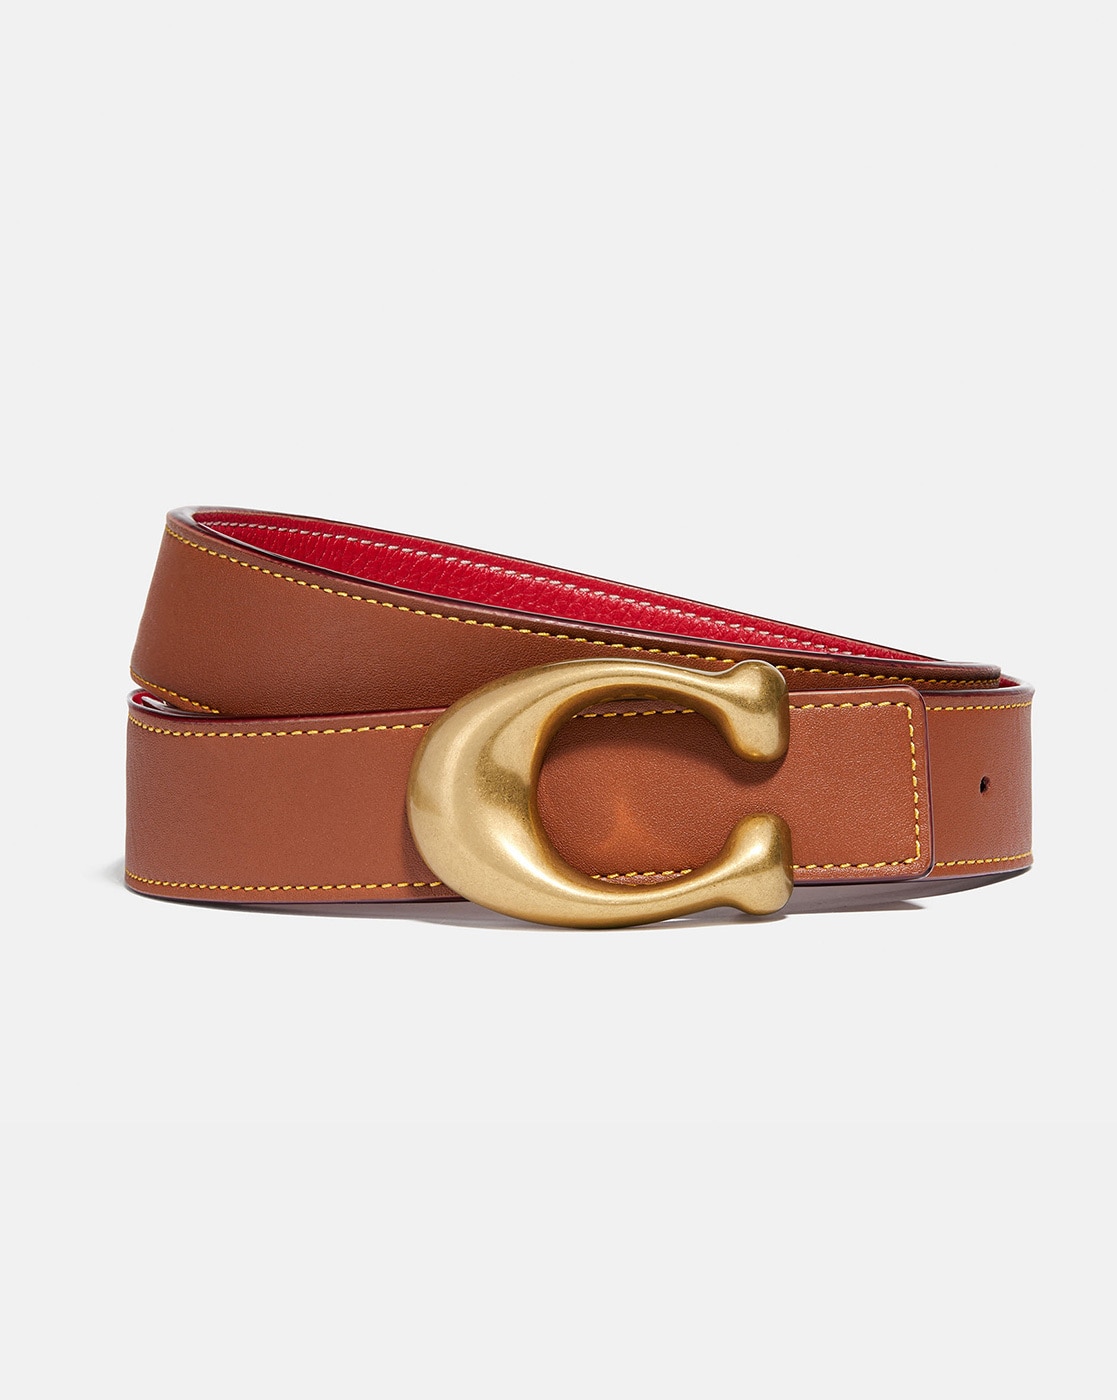 Buy Coach Leather Belt with Pin-Buckle Closure, Brown Color Women